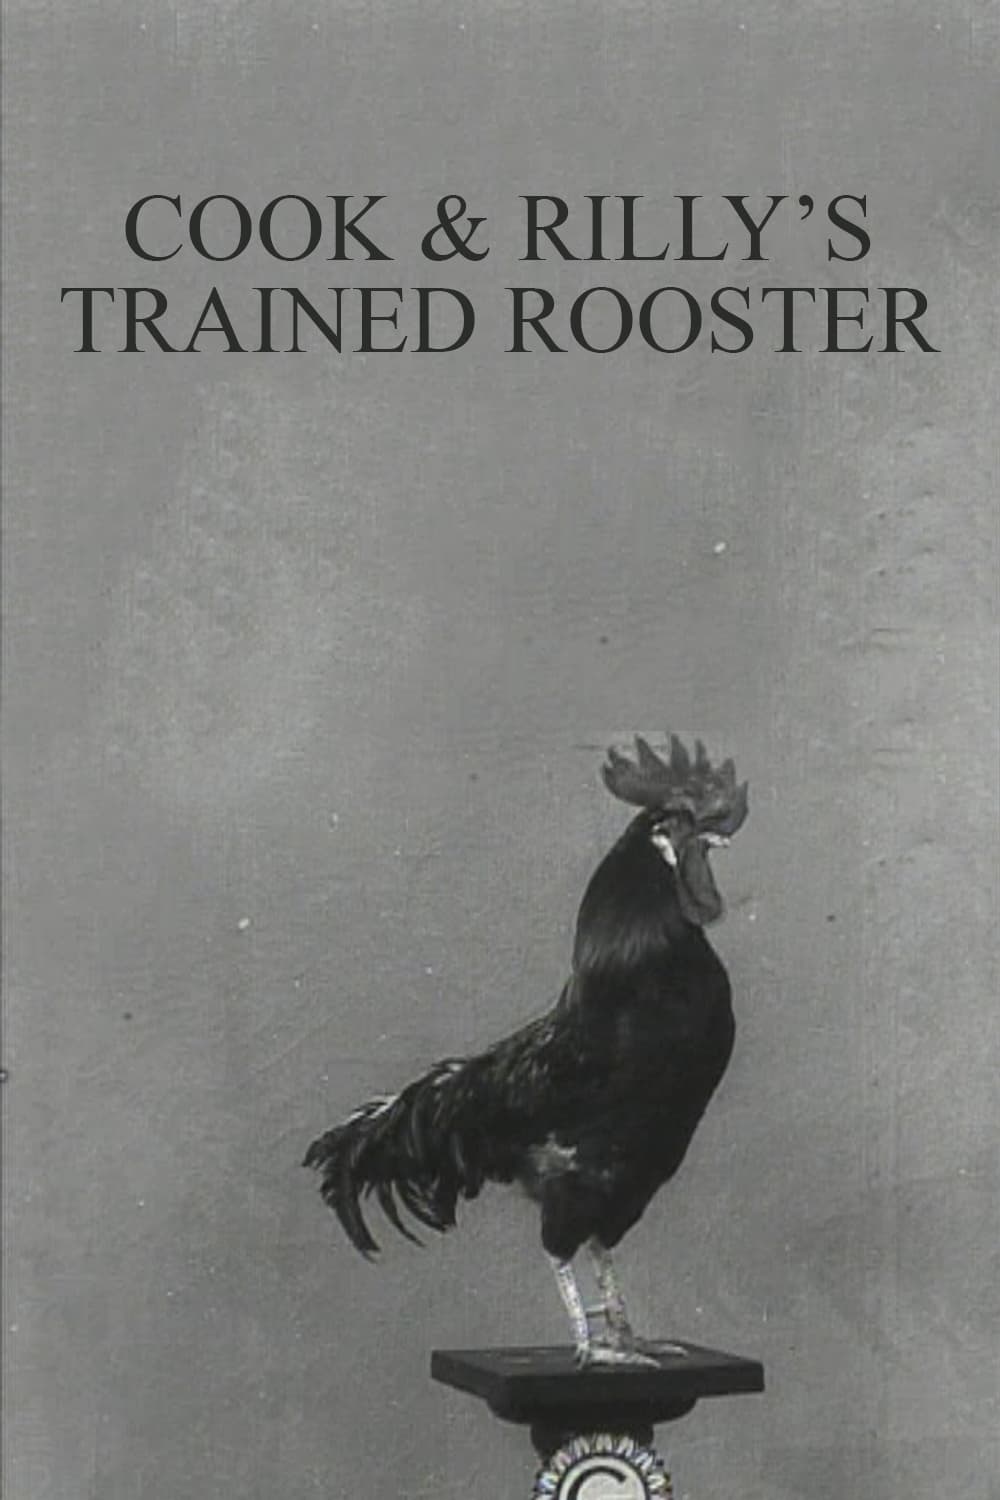 Cook & Rilly's Trained Rooster